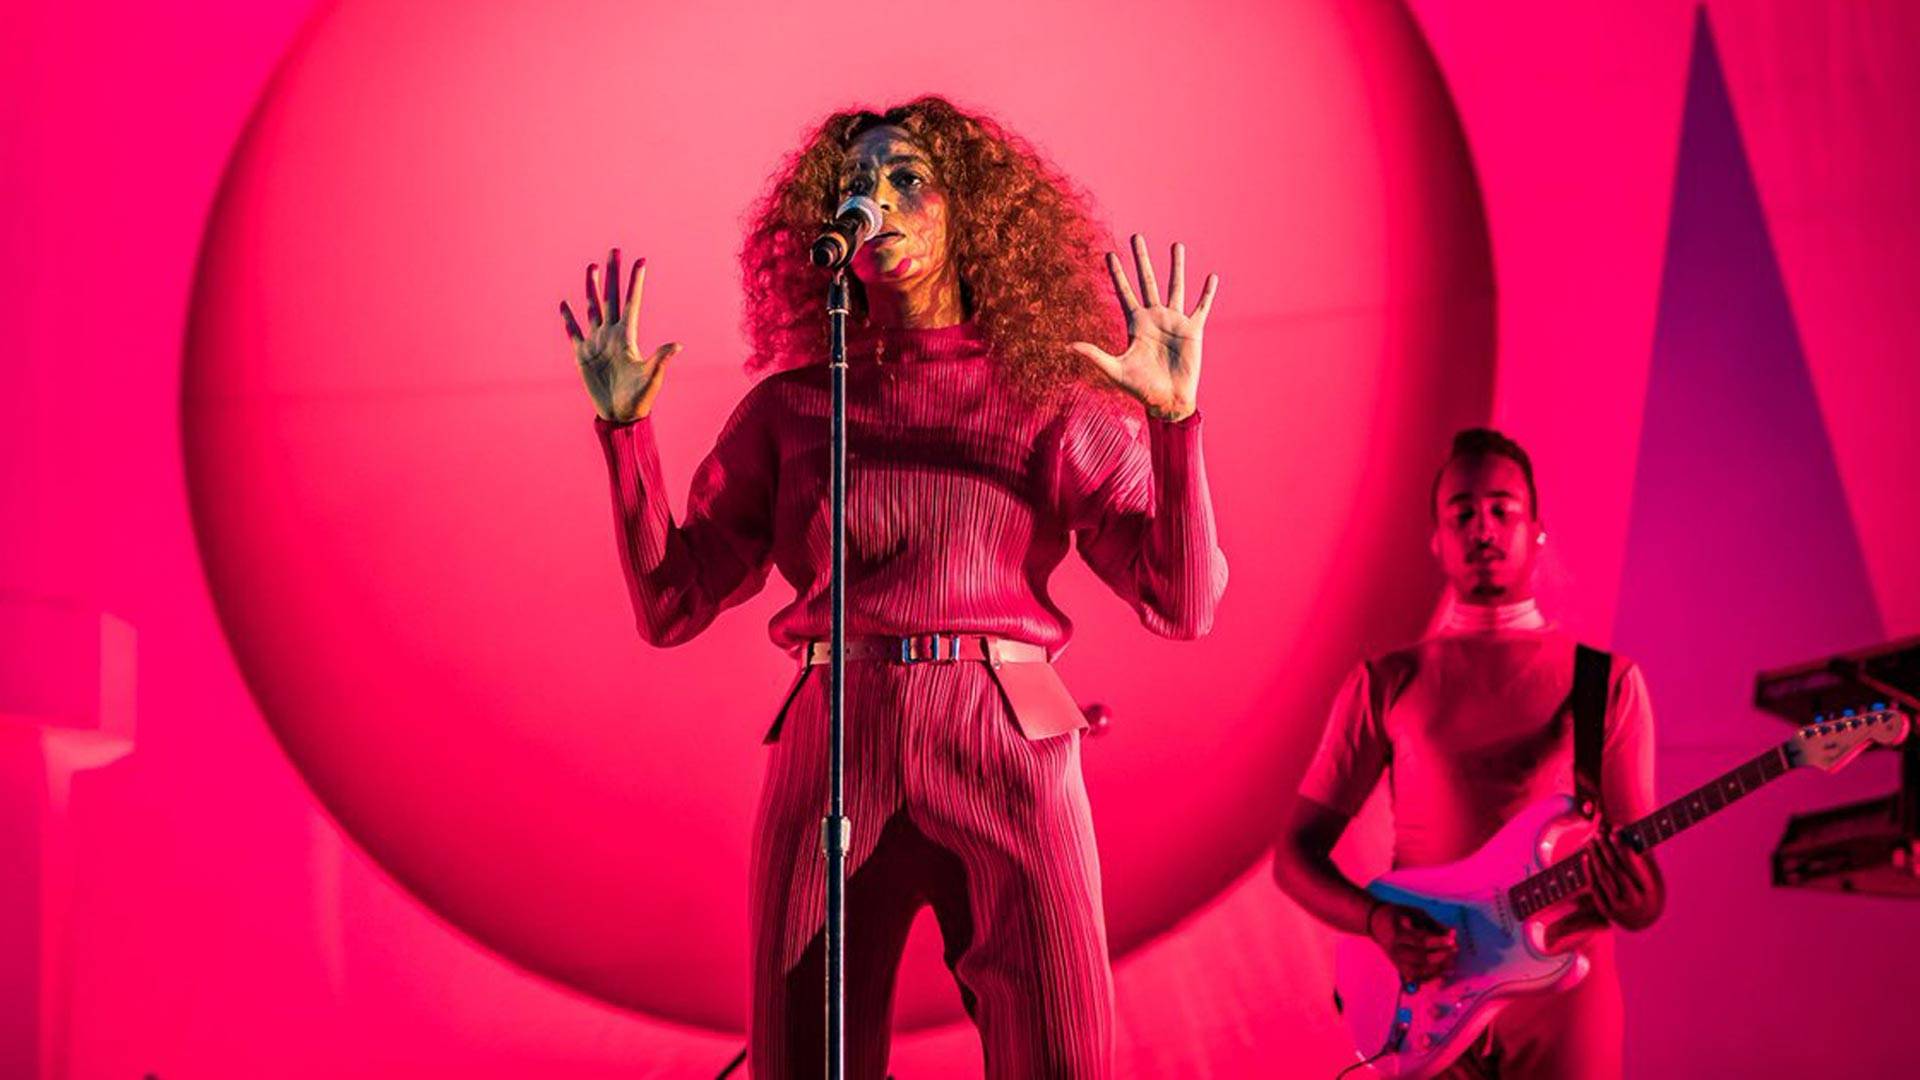 Solange performs Aug. 13, 2017, at the Outside Lands music festival in Golden Gate Park. Solange specifically offered support for her black, LGBTQ, and Muslim fans in the wake of the white nationalist violence in Charlottesville. via saintheron/Instagram